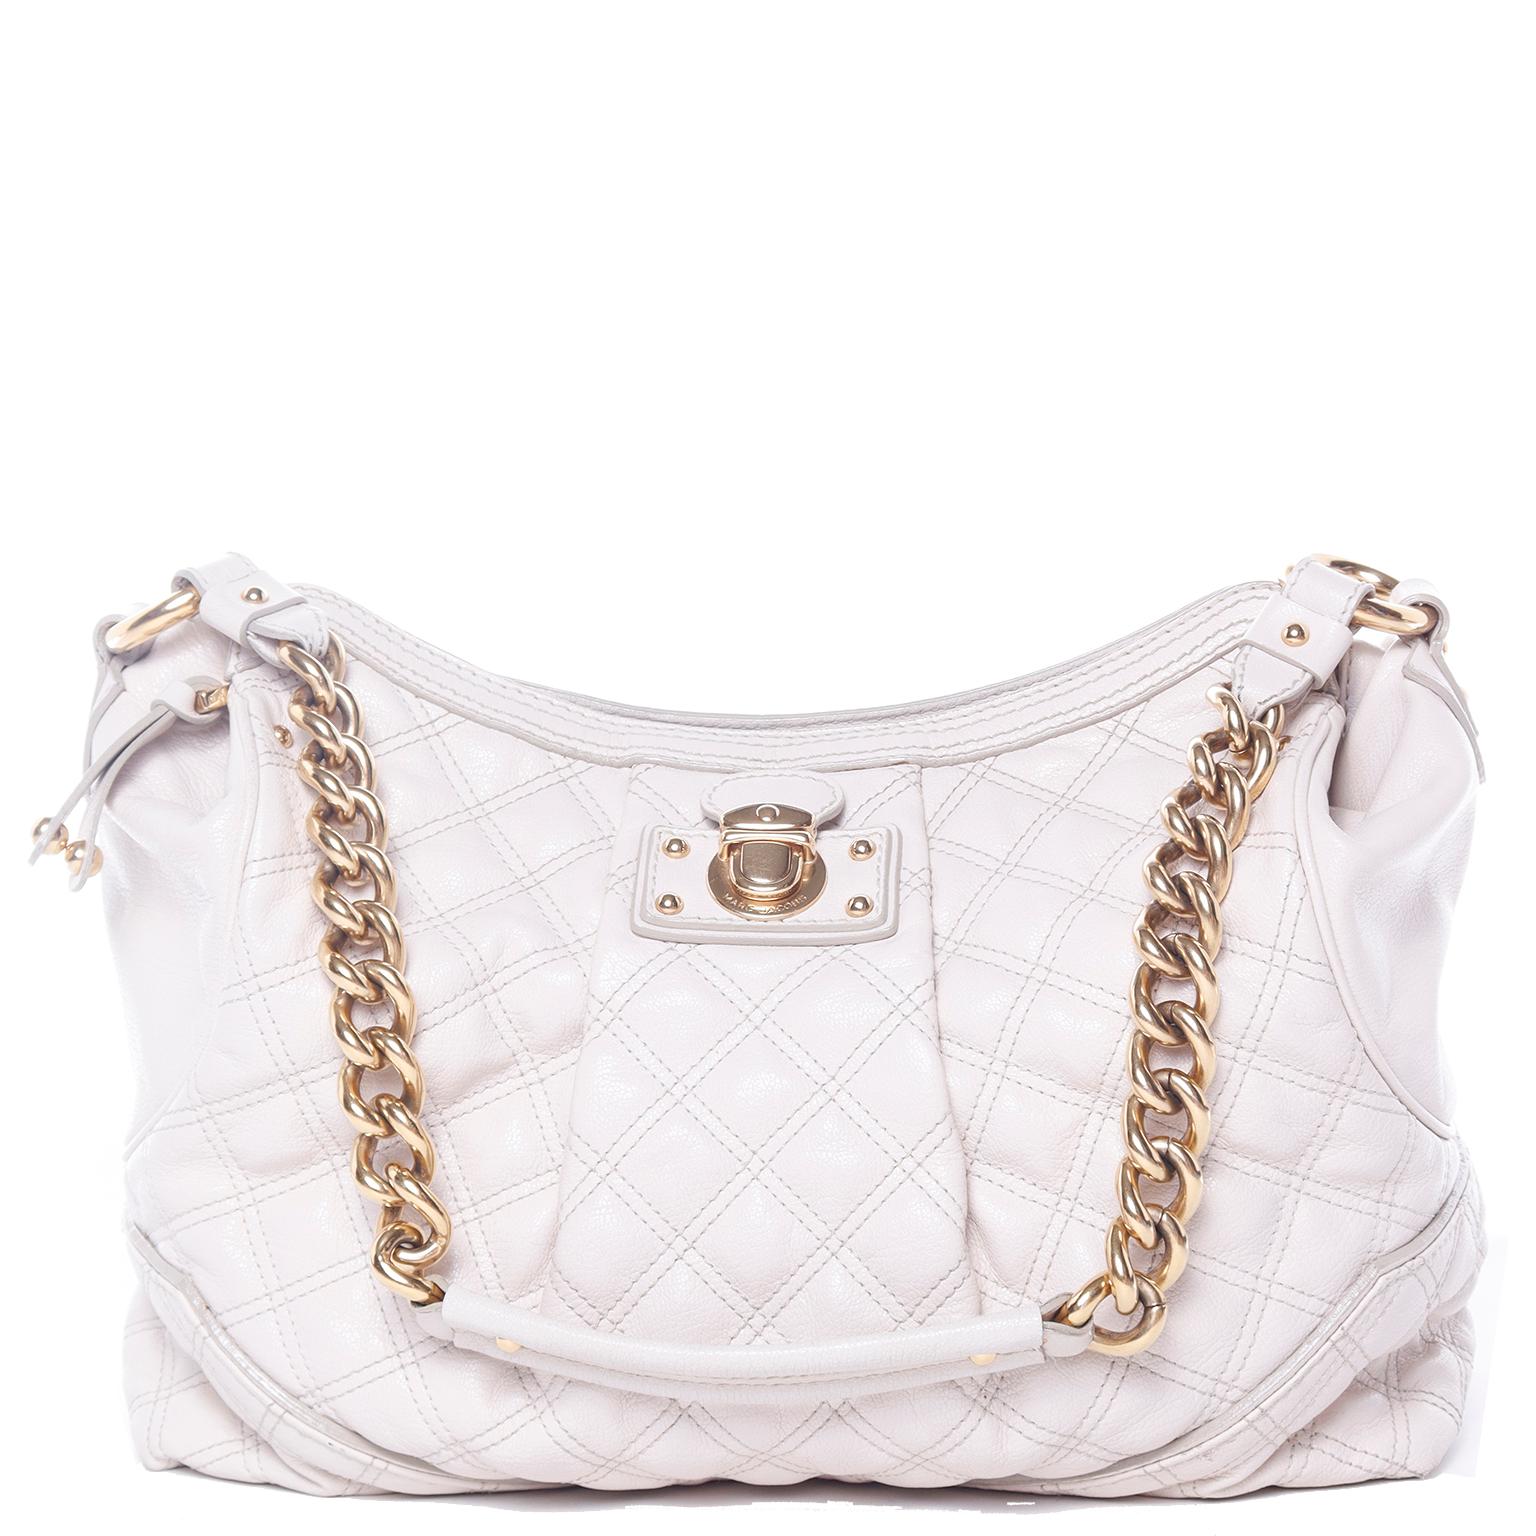 Marc Jacobs Black Quilted Leather Flap Chain Shoulder Bag at 1stDibs  marc  jacobs quilted bag with gold chain, marc jacobs black bag with gold chain, marc  jacobs pearl bag